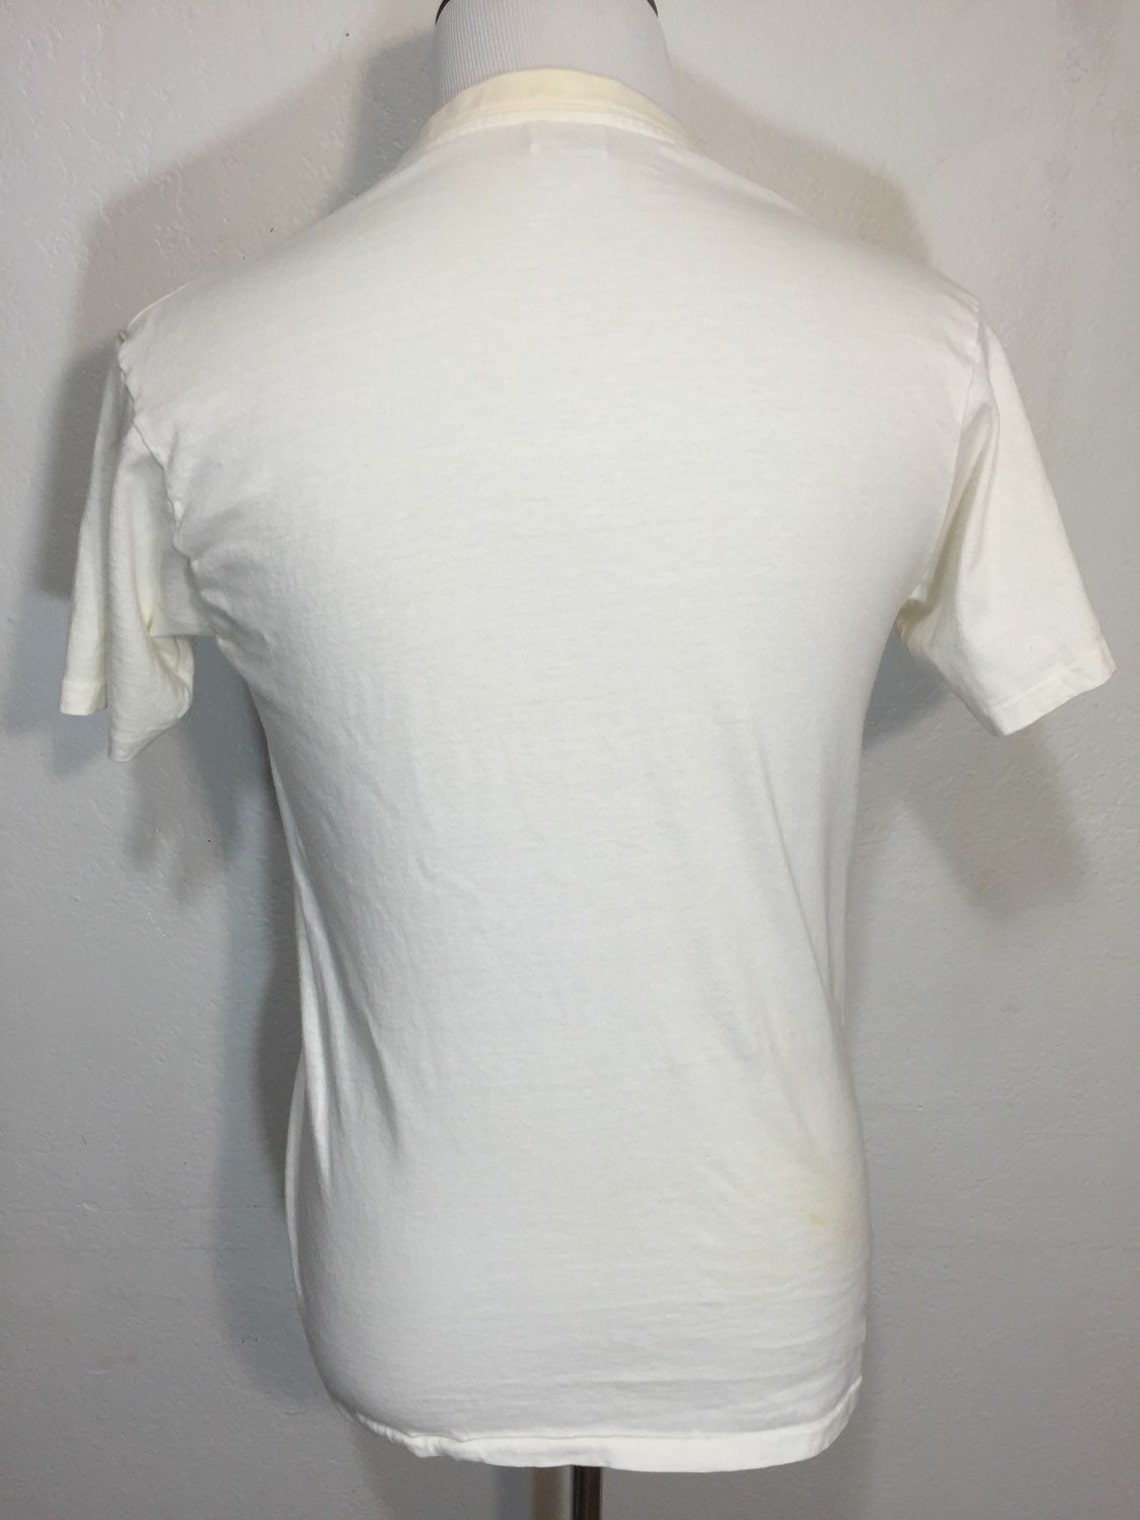 80's Vintage V-neck Blank T Shirt 100% Cotton Made in Usa | Etsy